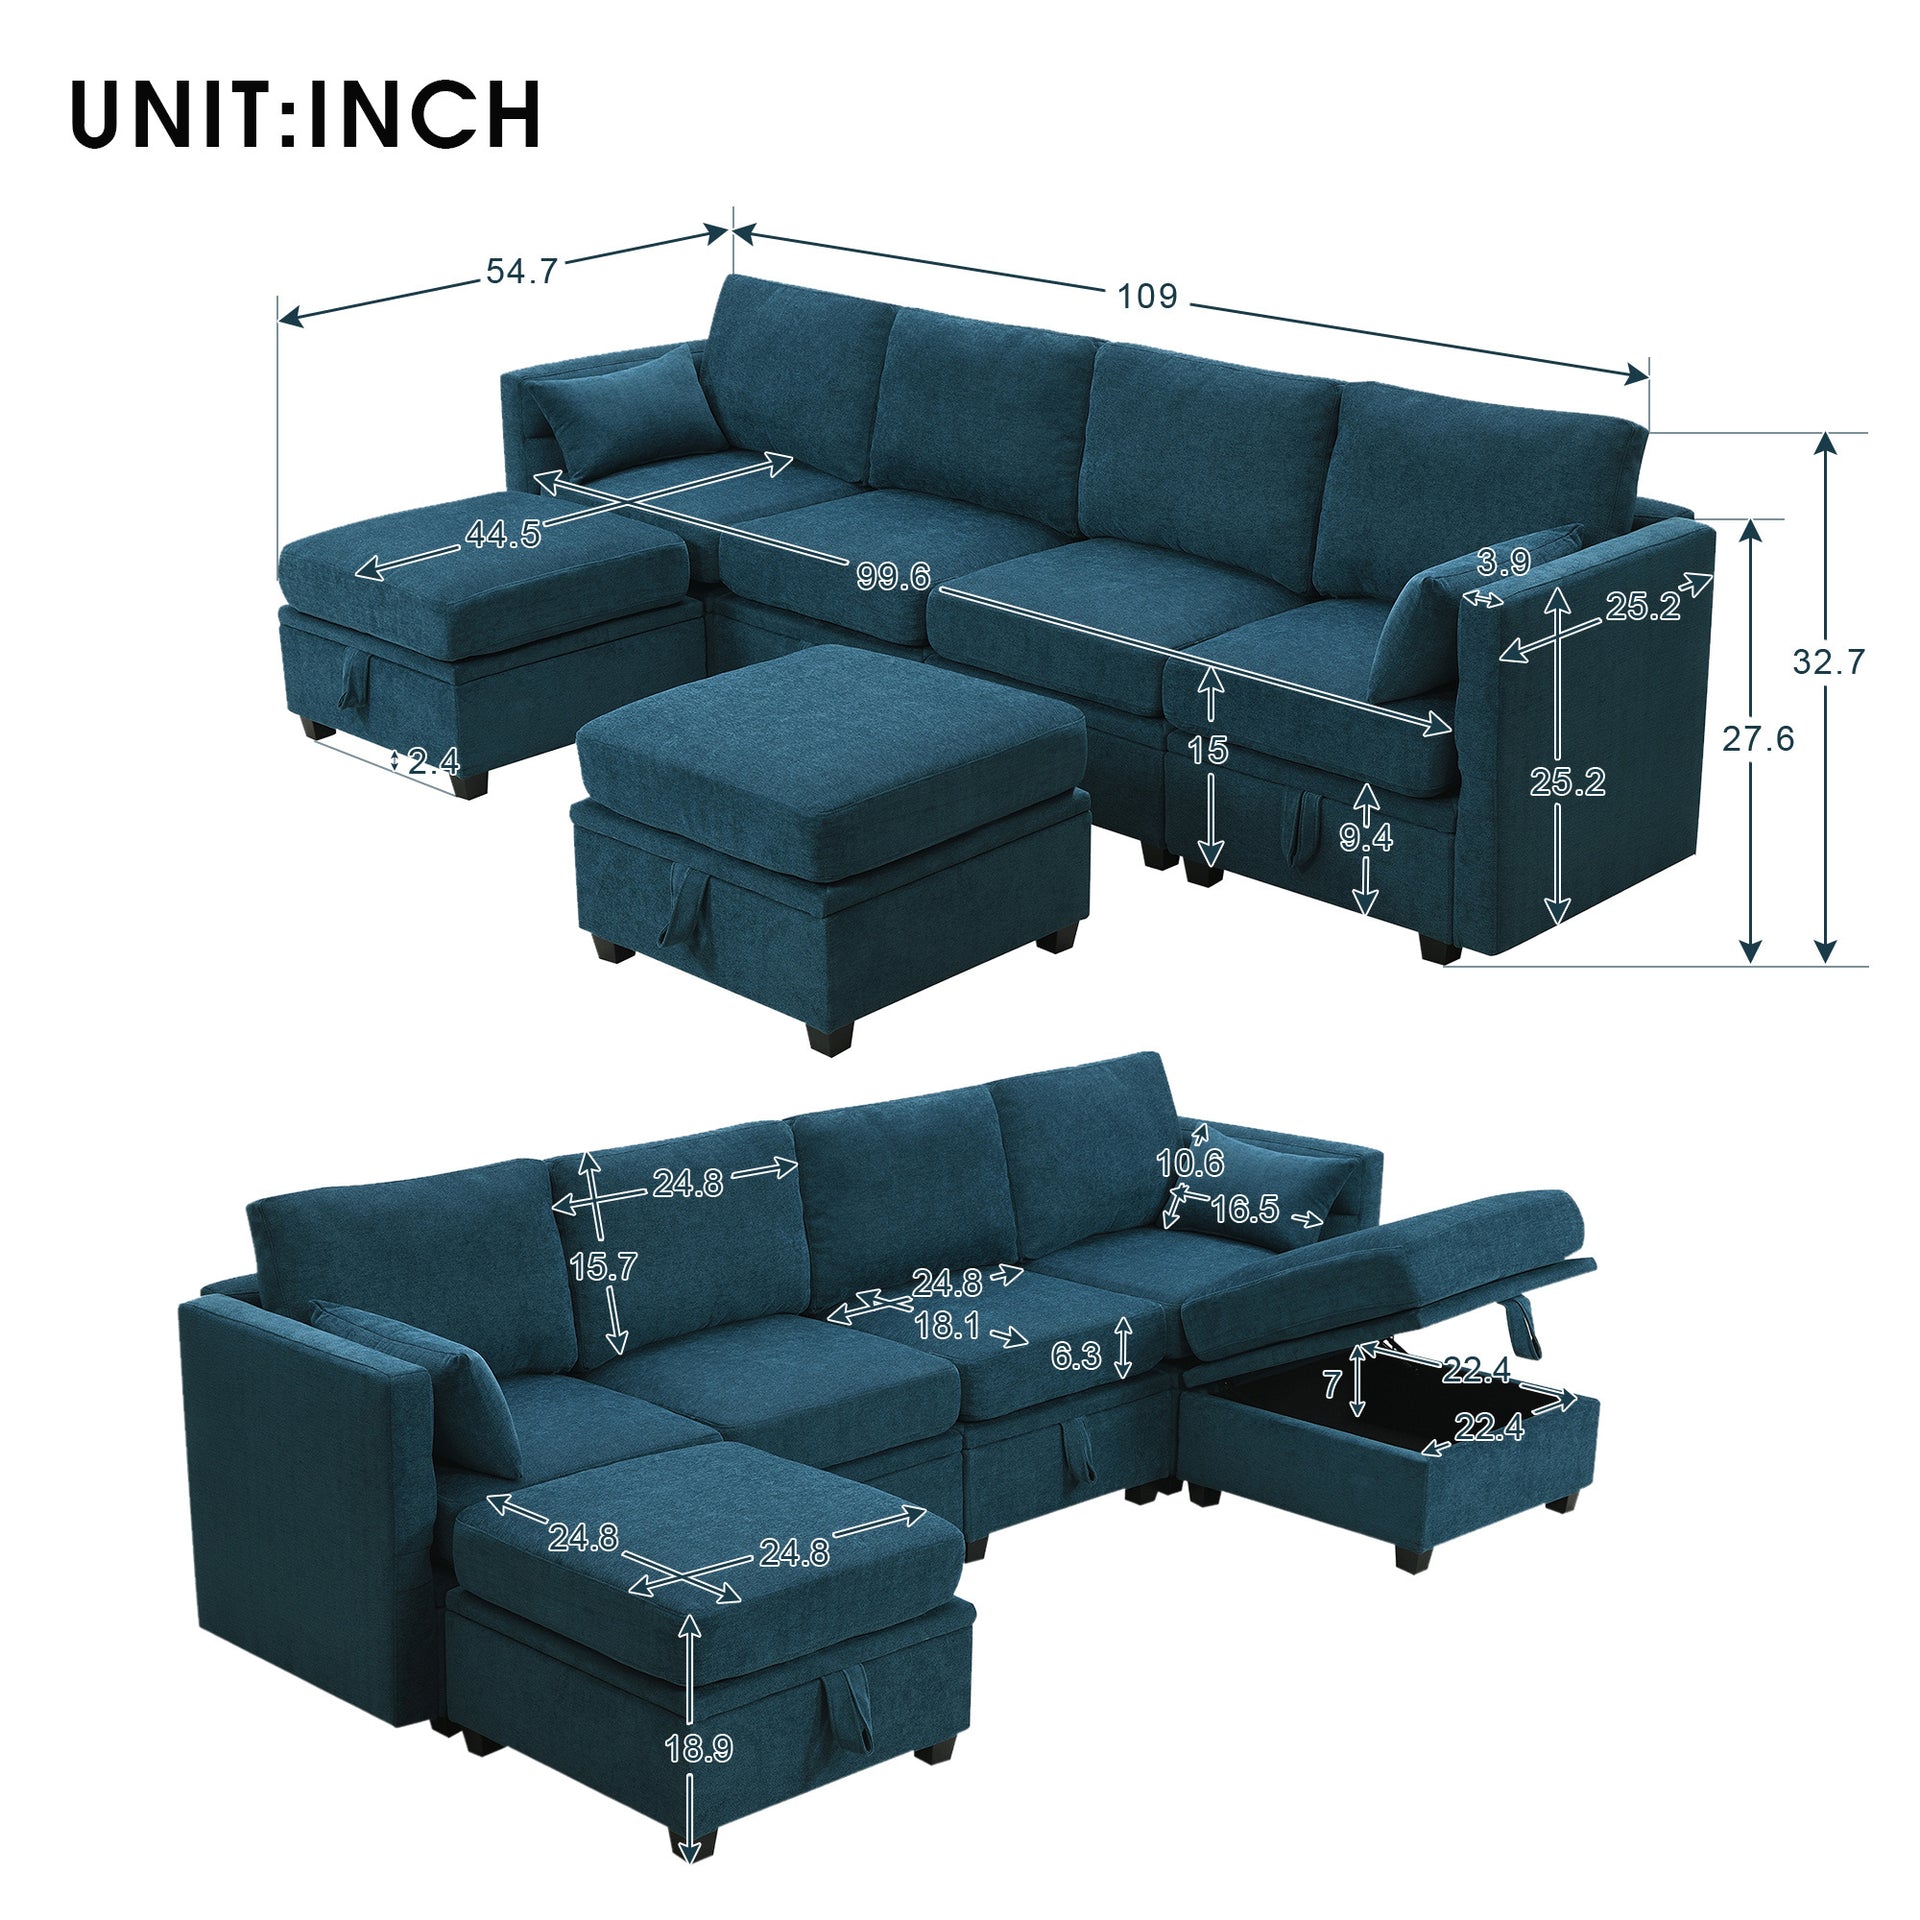 Chenille Sectional Sofa with Storage